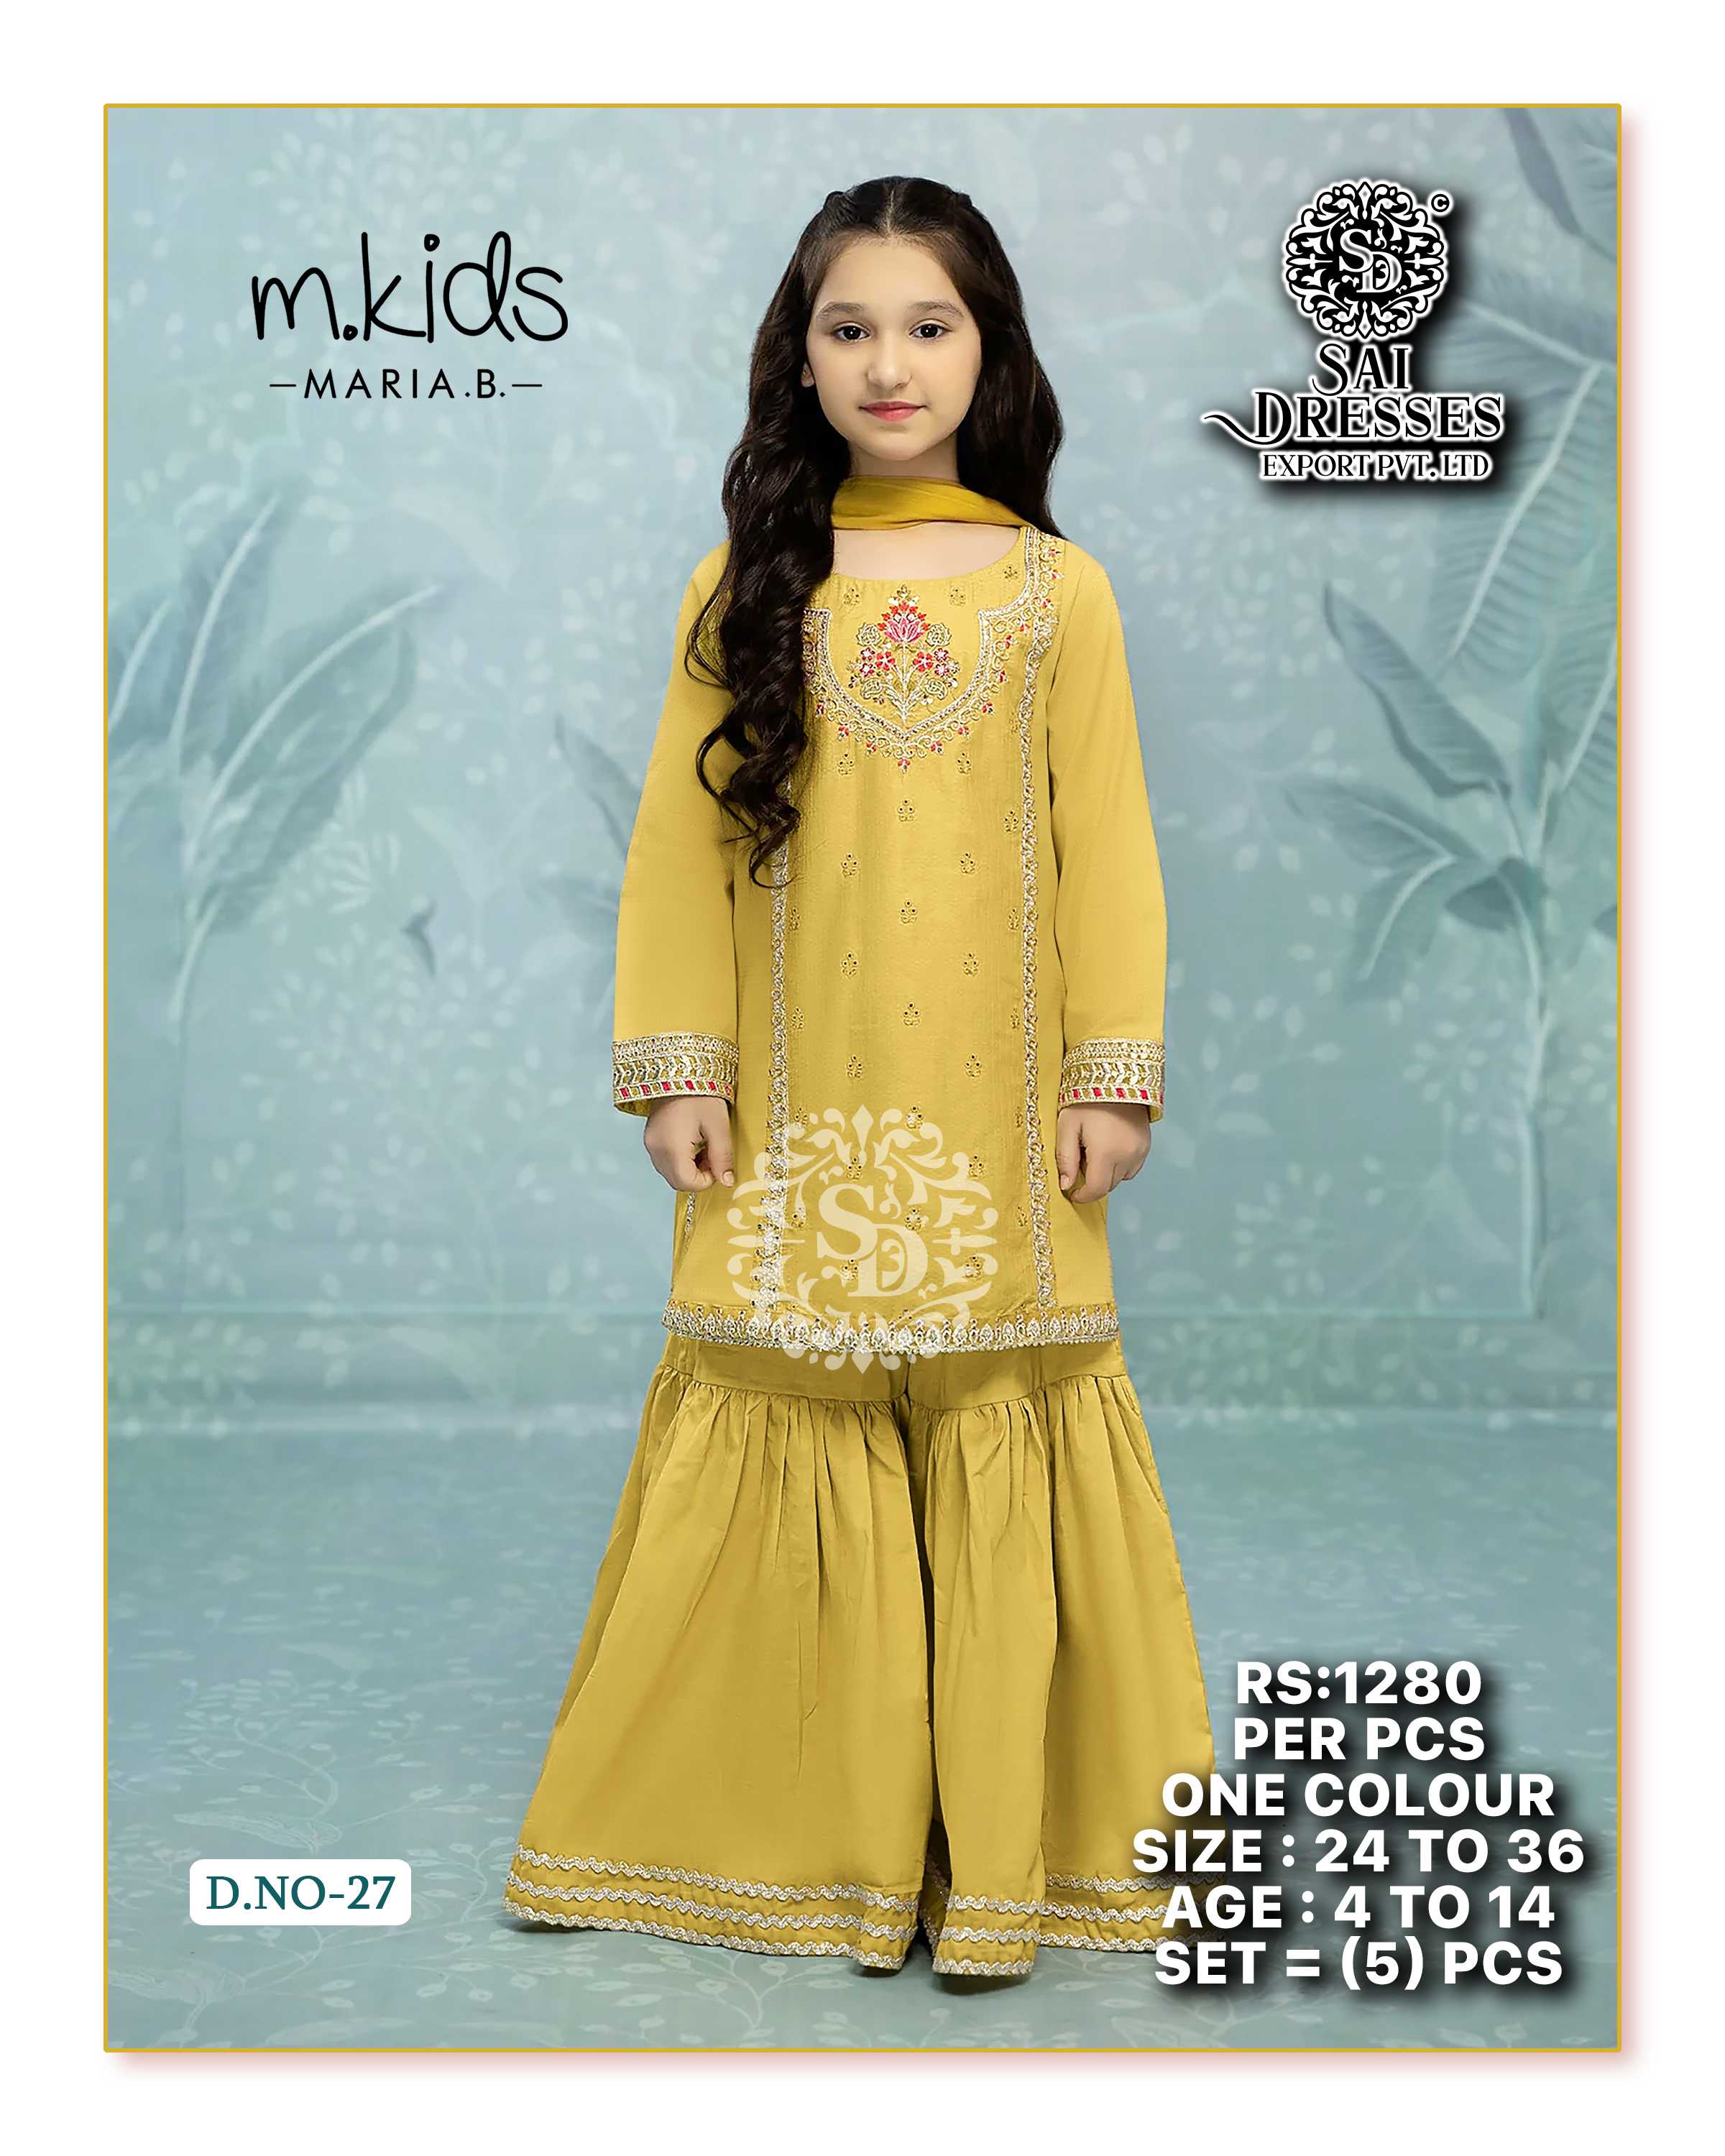 SAI DRESSES PRESENT D.NO 27 READY TO TRENDY WEAR GHARARA STYLE DESIGNER PAKISTANI KIDS COMBO SUITS IN WHOLESALE RATE IN SURAT